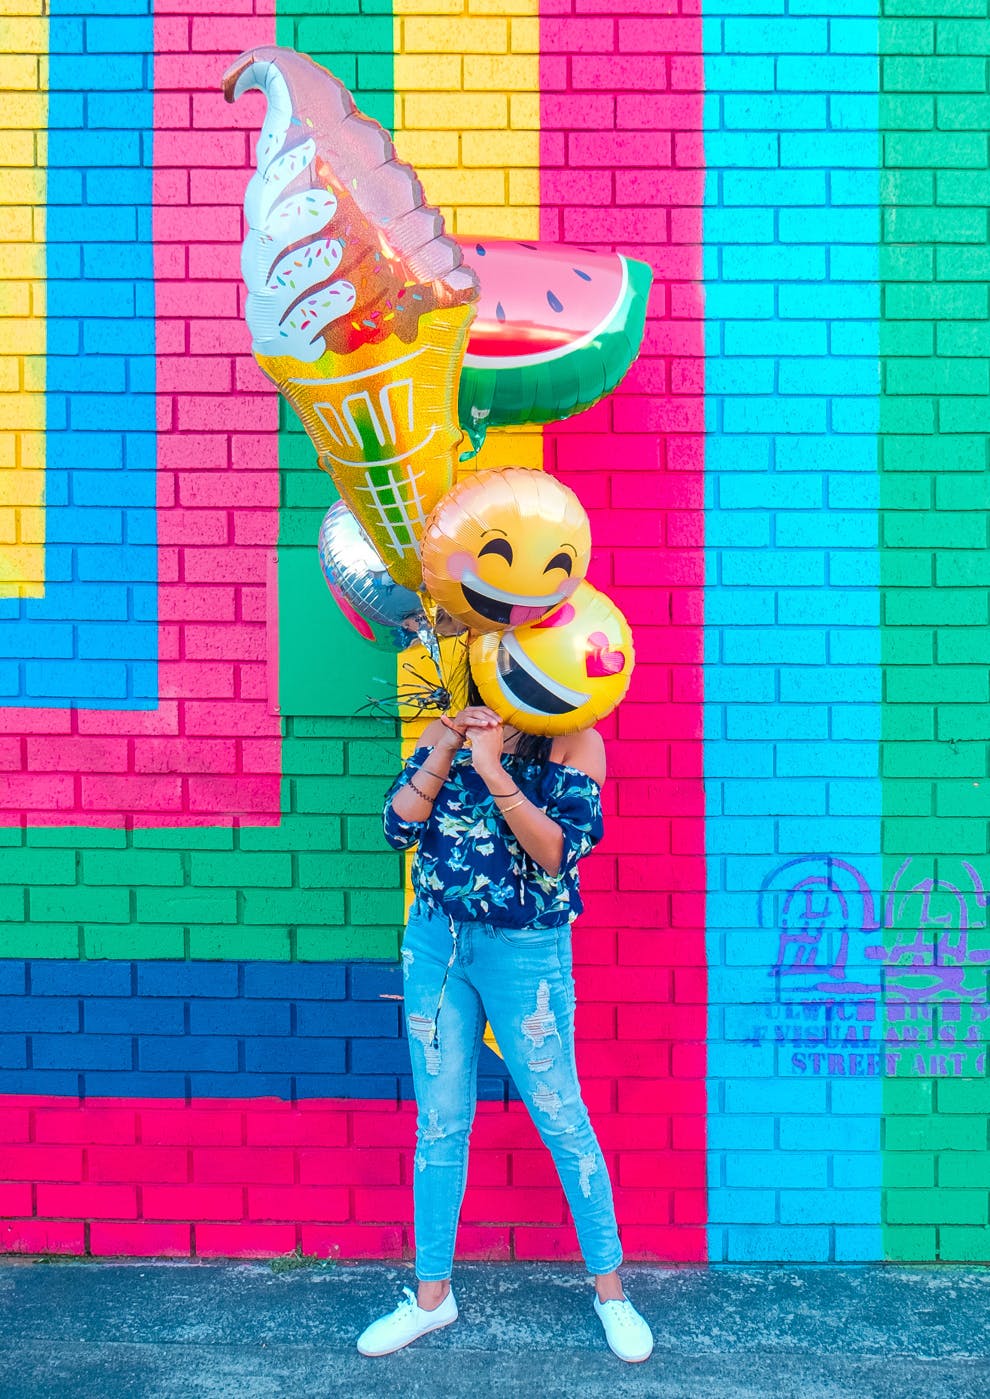 woman standing before a colorful wall hiding her face behind large fruit shaped balloons